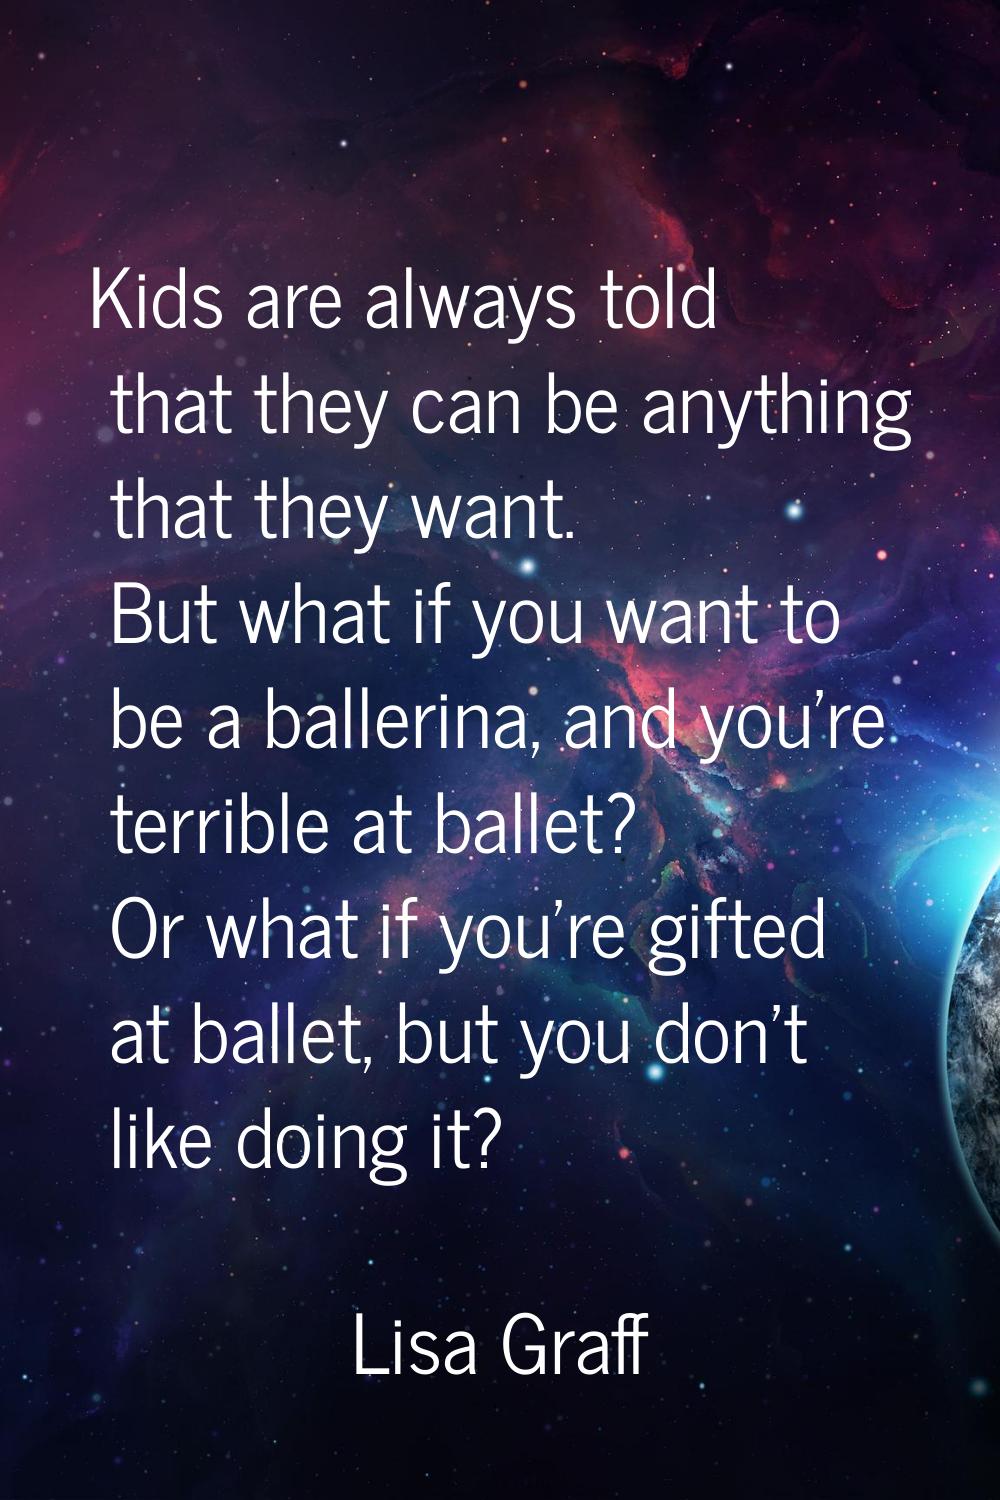 Kids are always told that they can be anything that they want. But what if you want to be a balleri